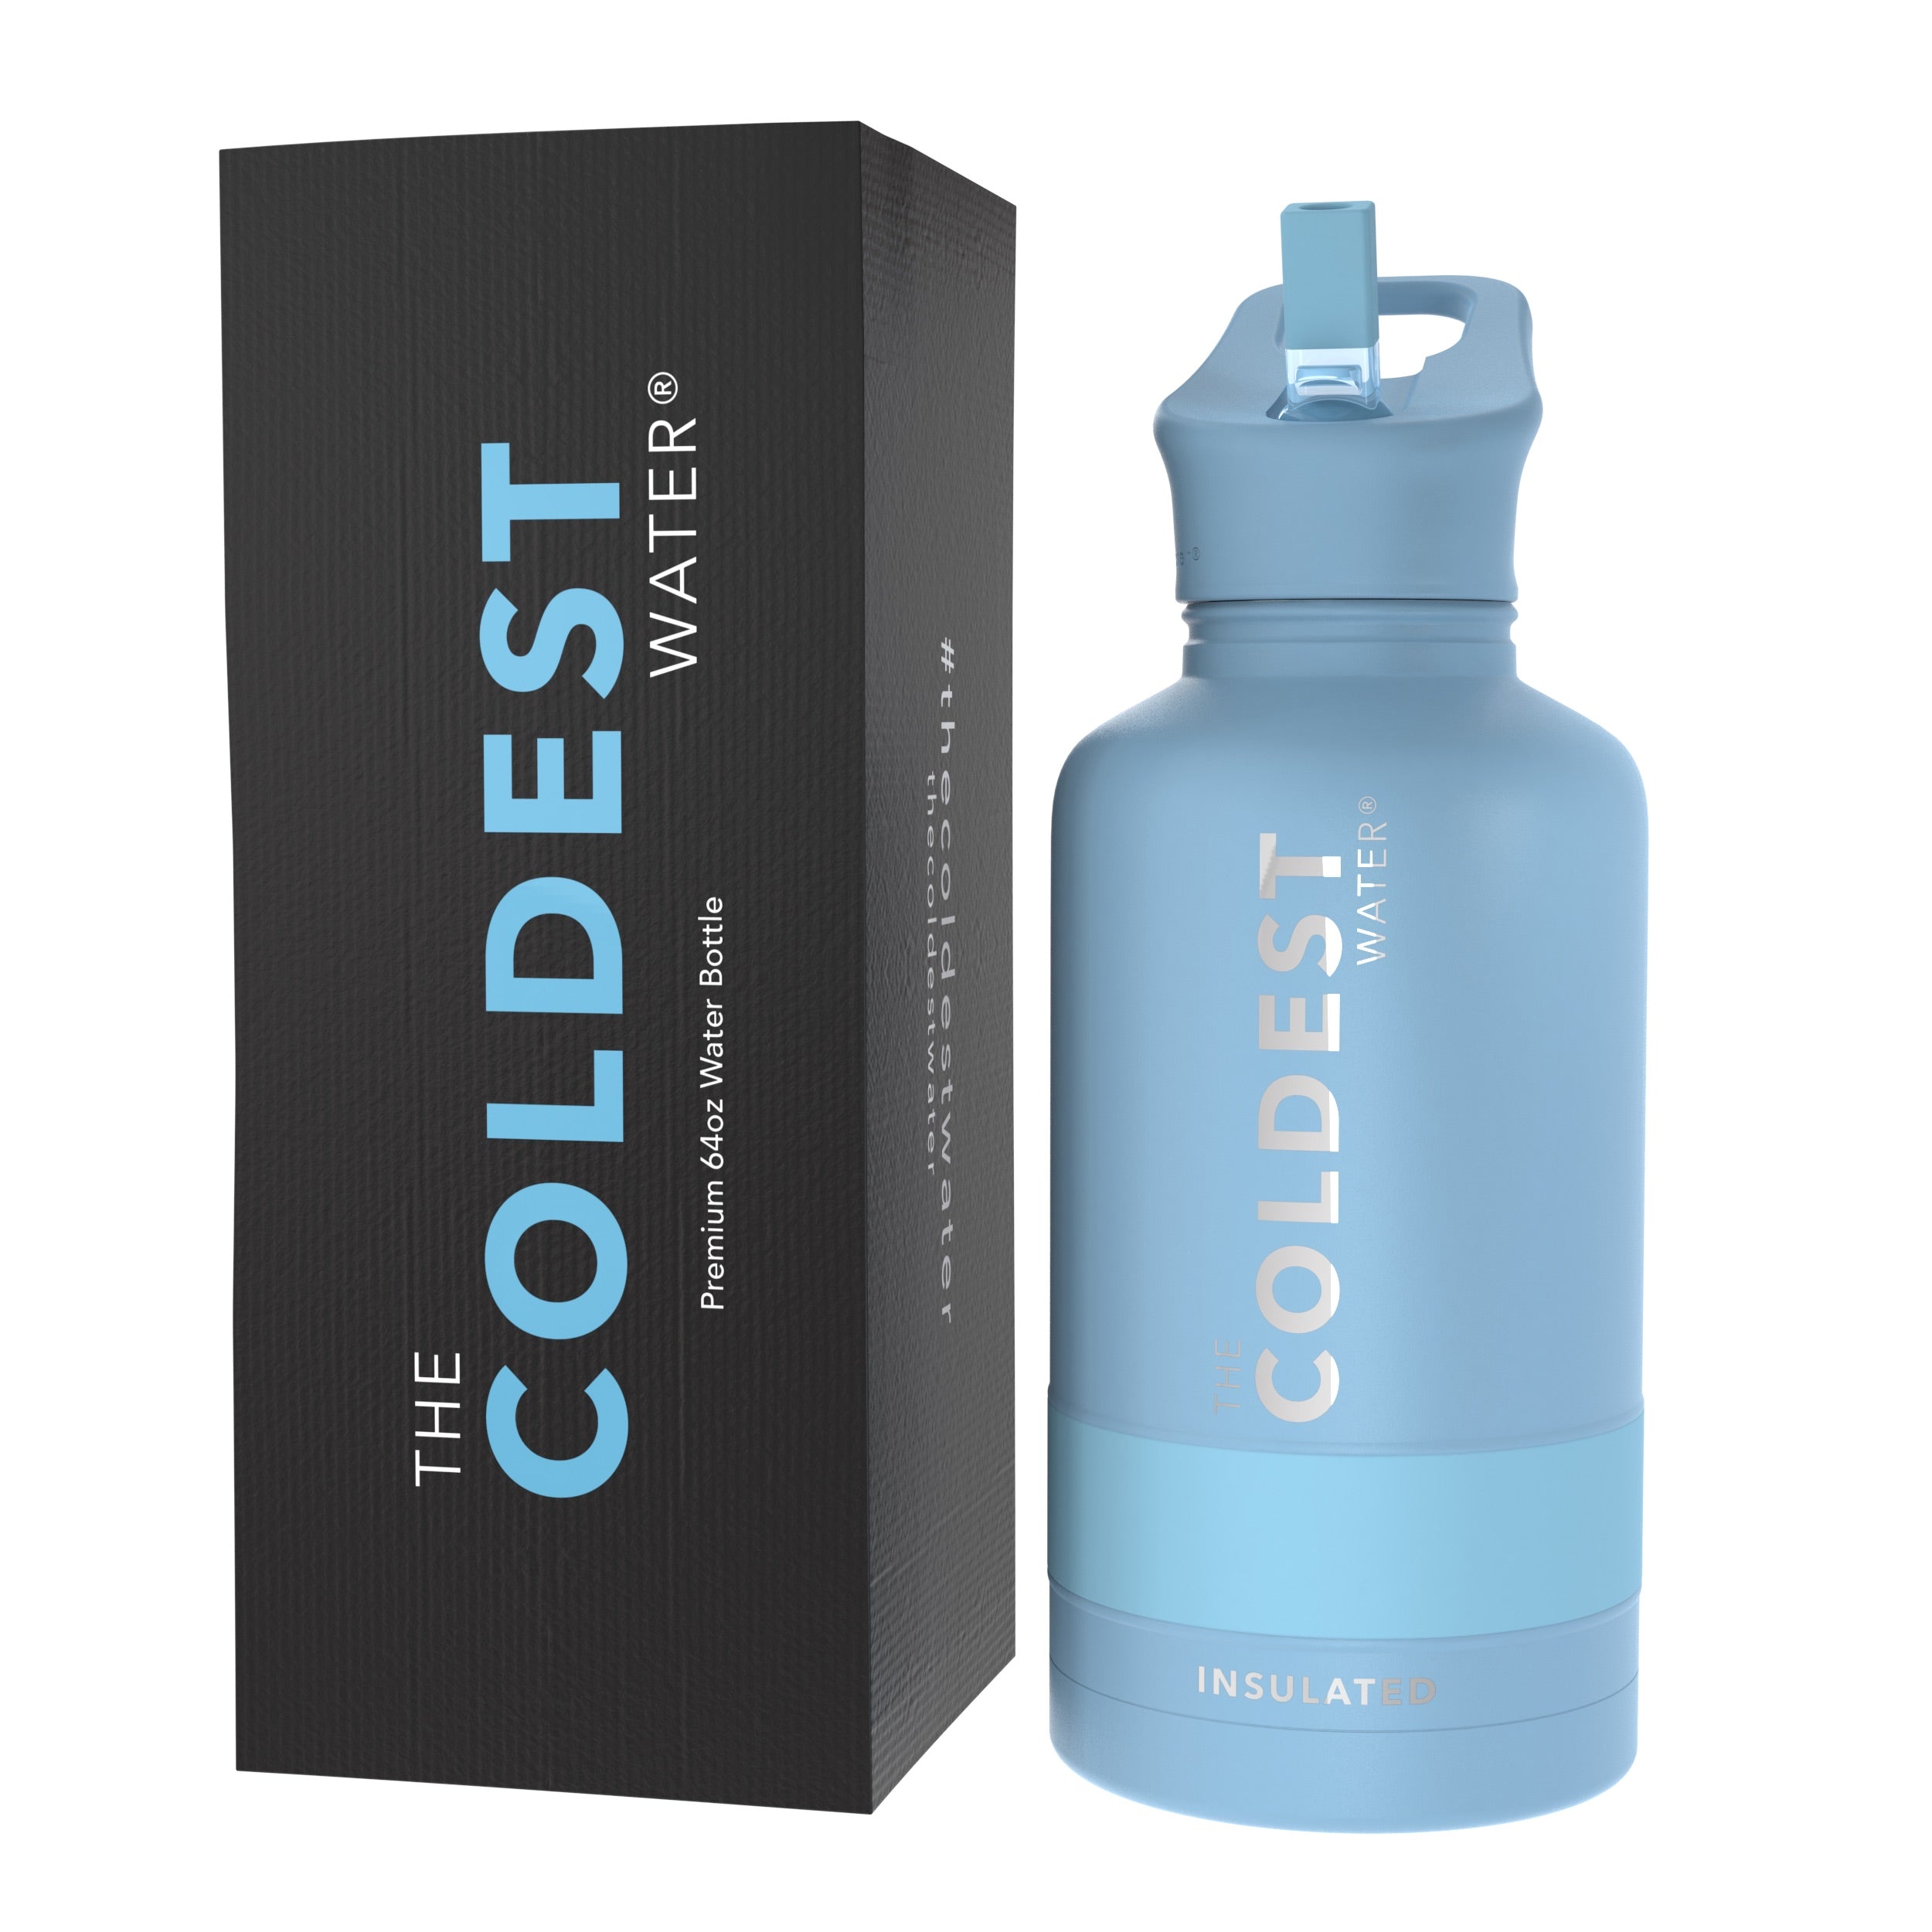 Where is the coldest water bottle manufactured?